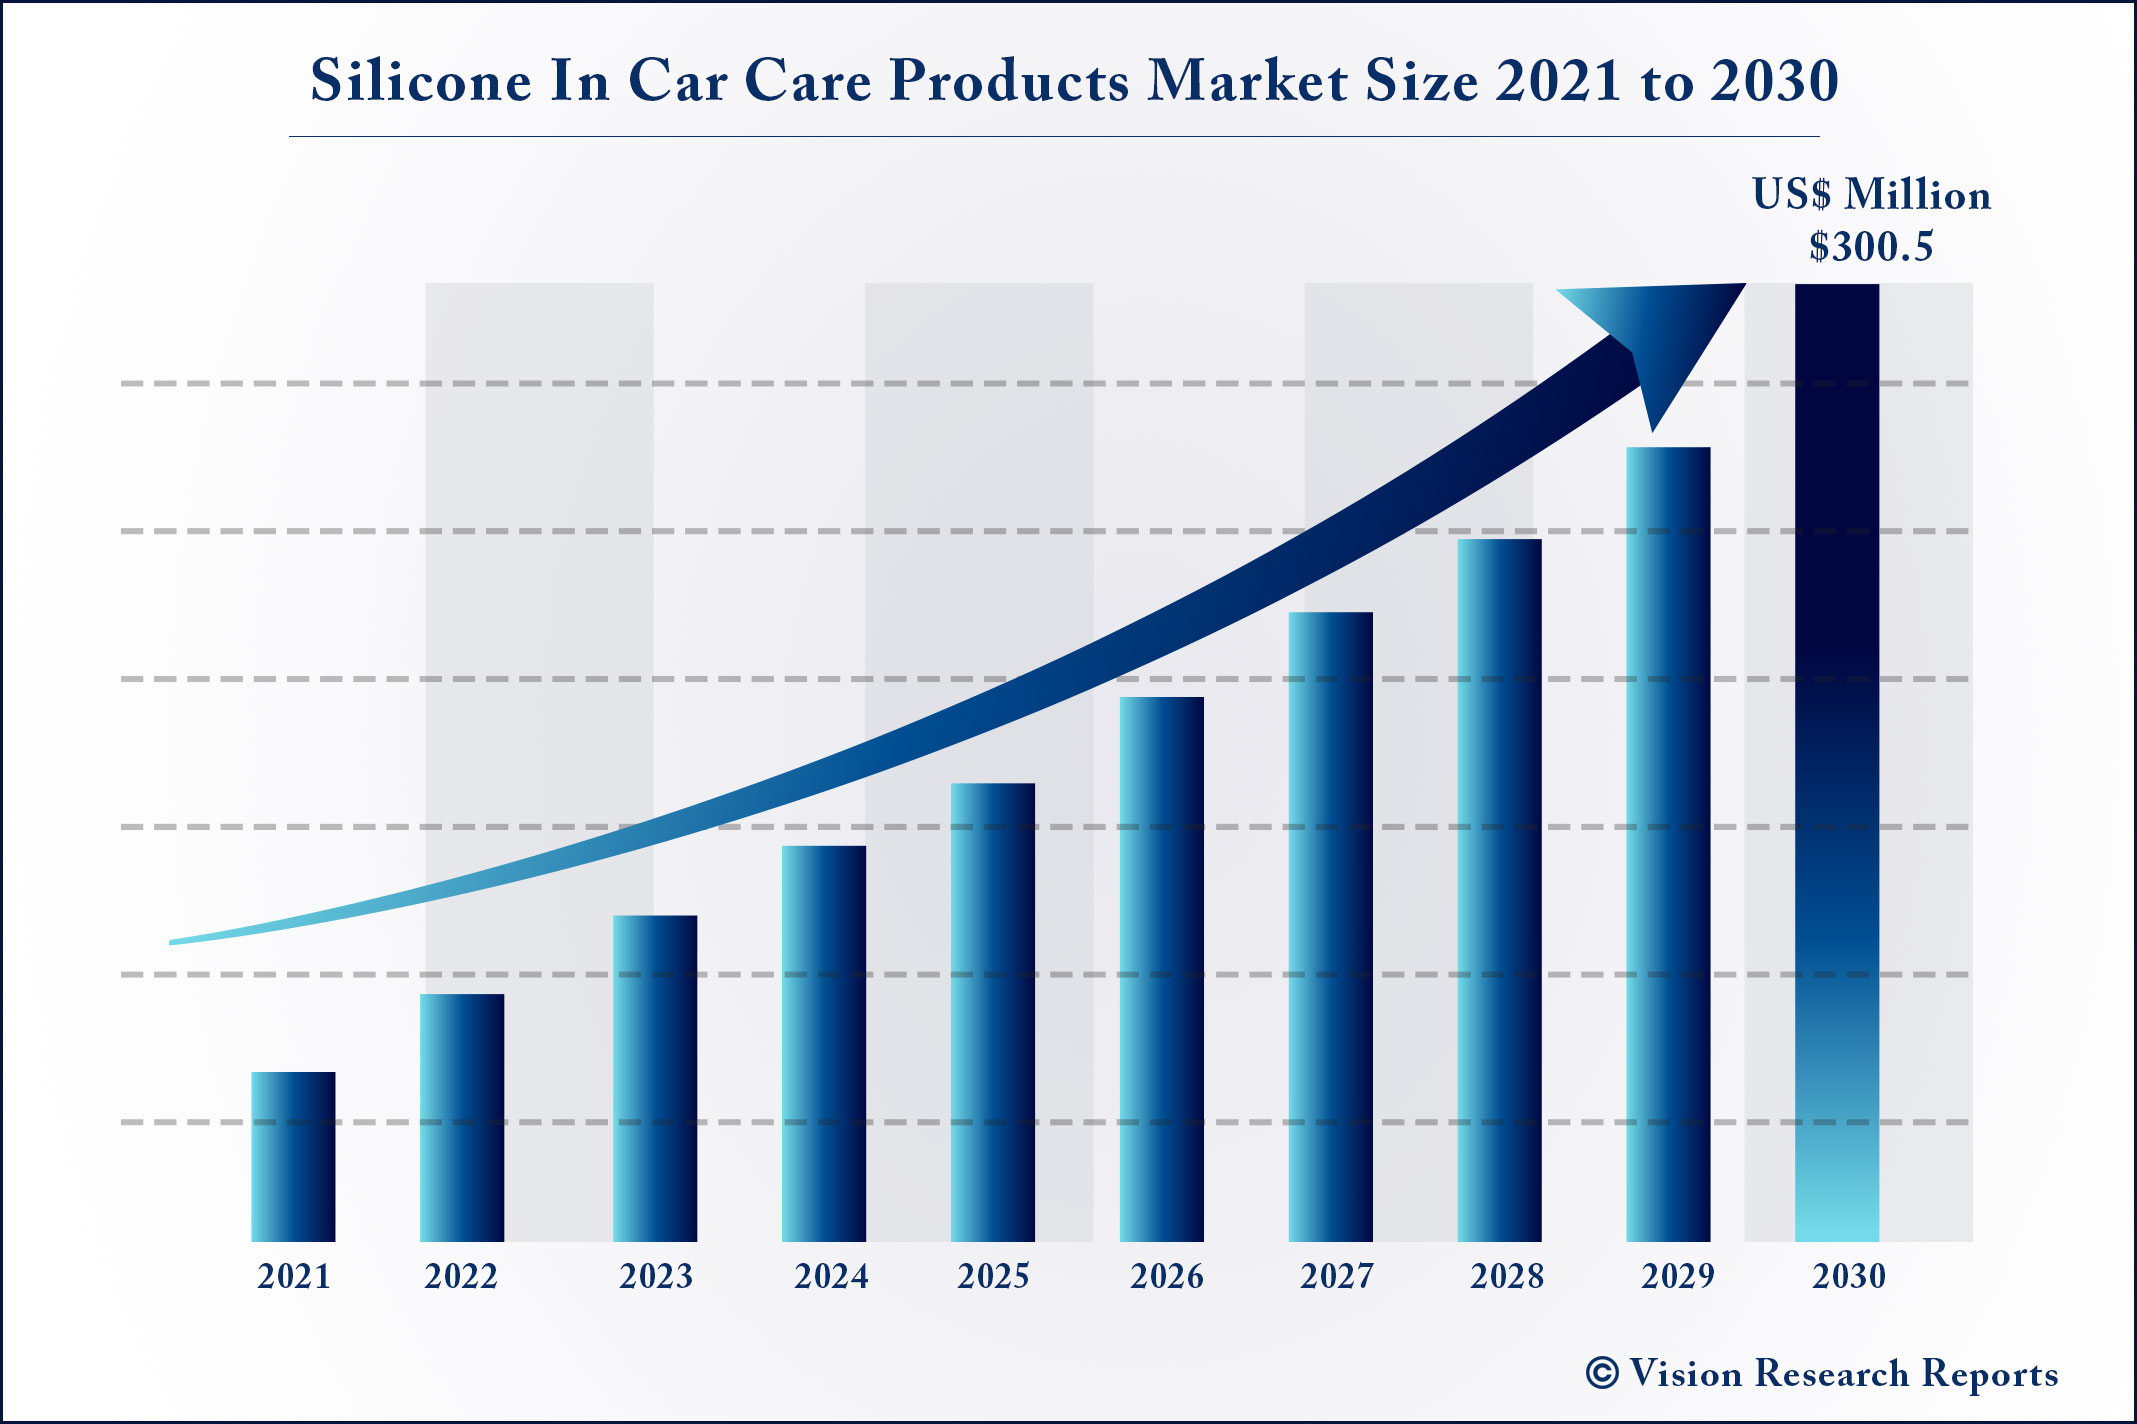 Silicone In Car Care Products Market Size 2021 to 2030